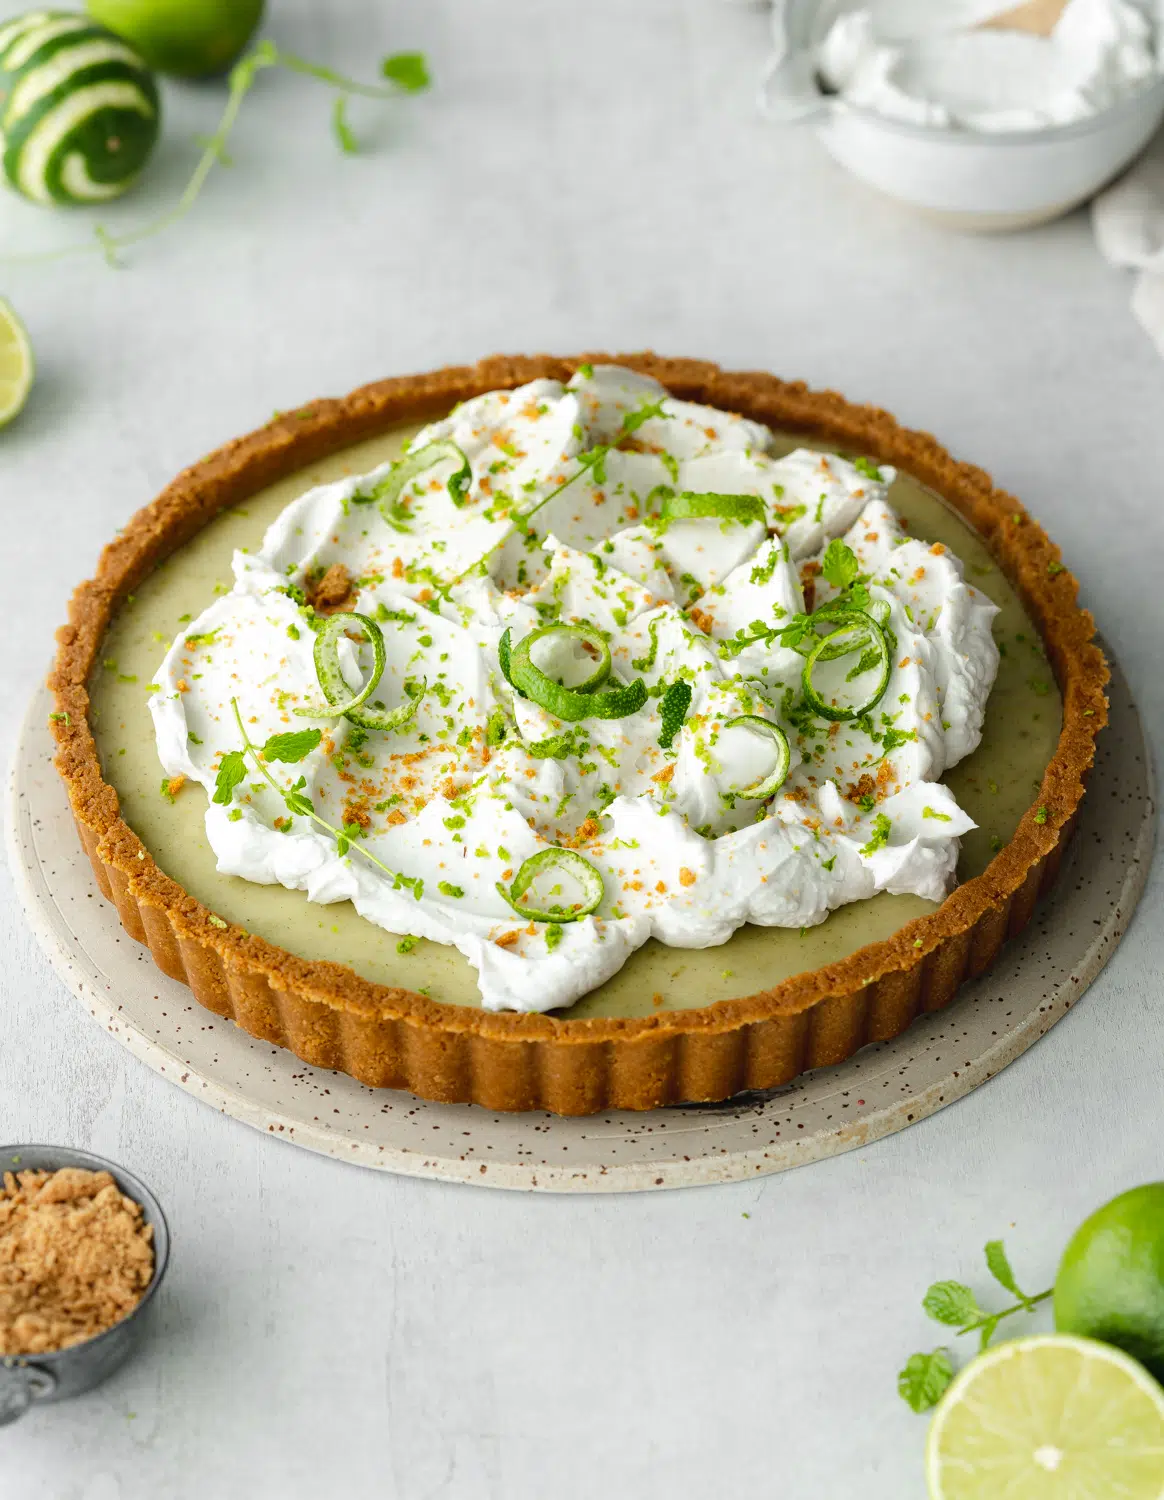 vegan key lime pie with gingernut crust and coconut cream topping.